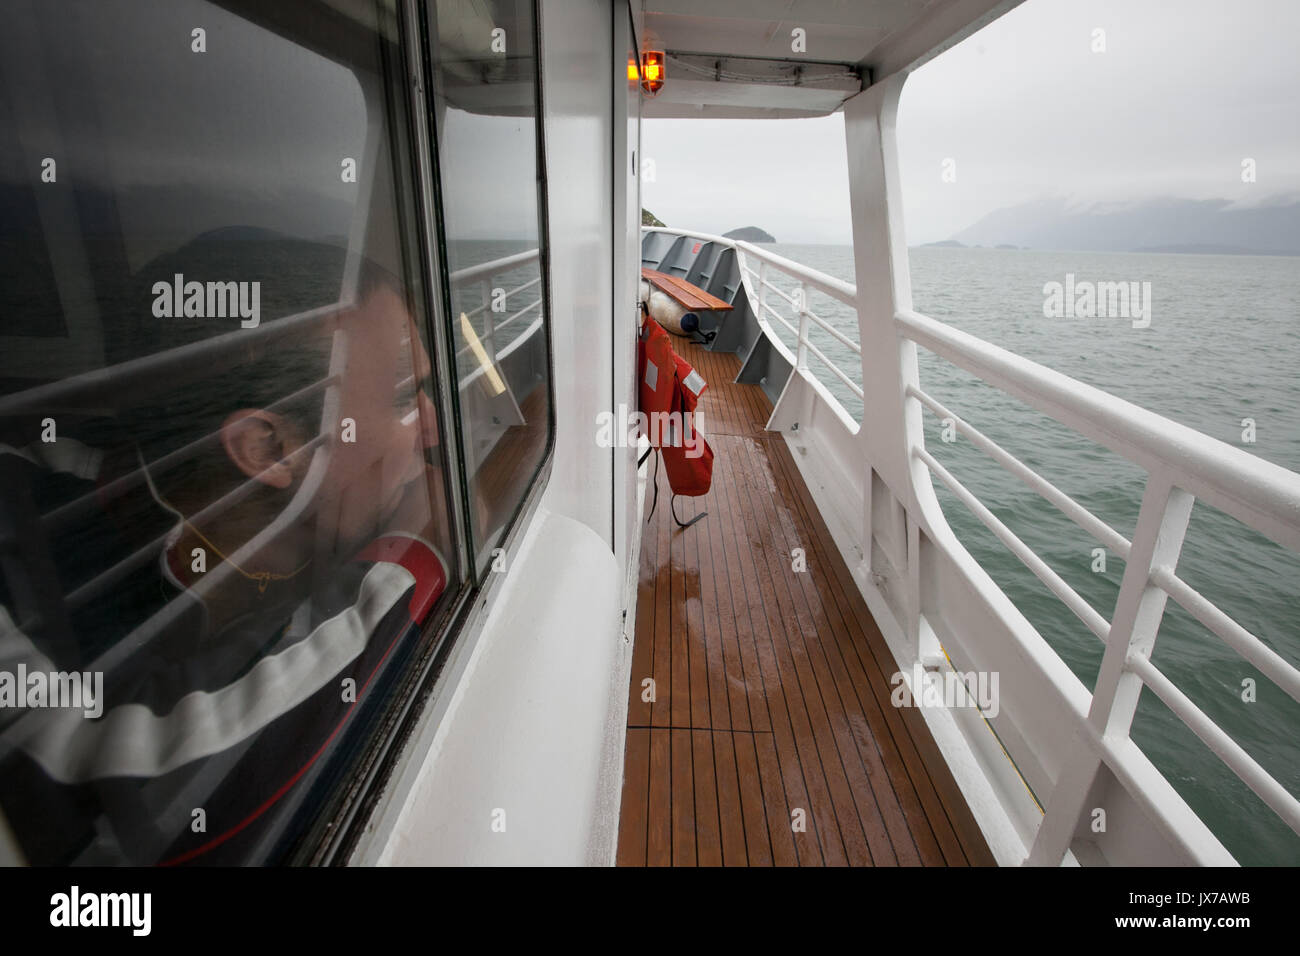 A passenger looks through a window at the surrounding landscape on a rainy day. Stock Photo